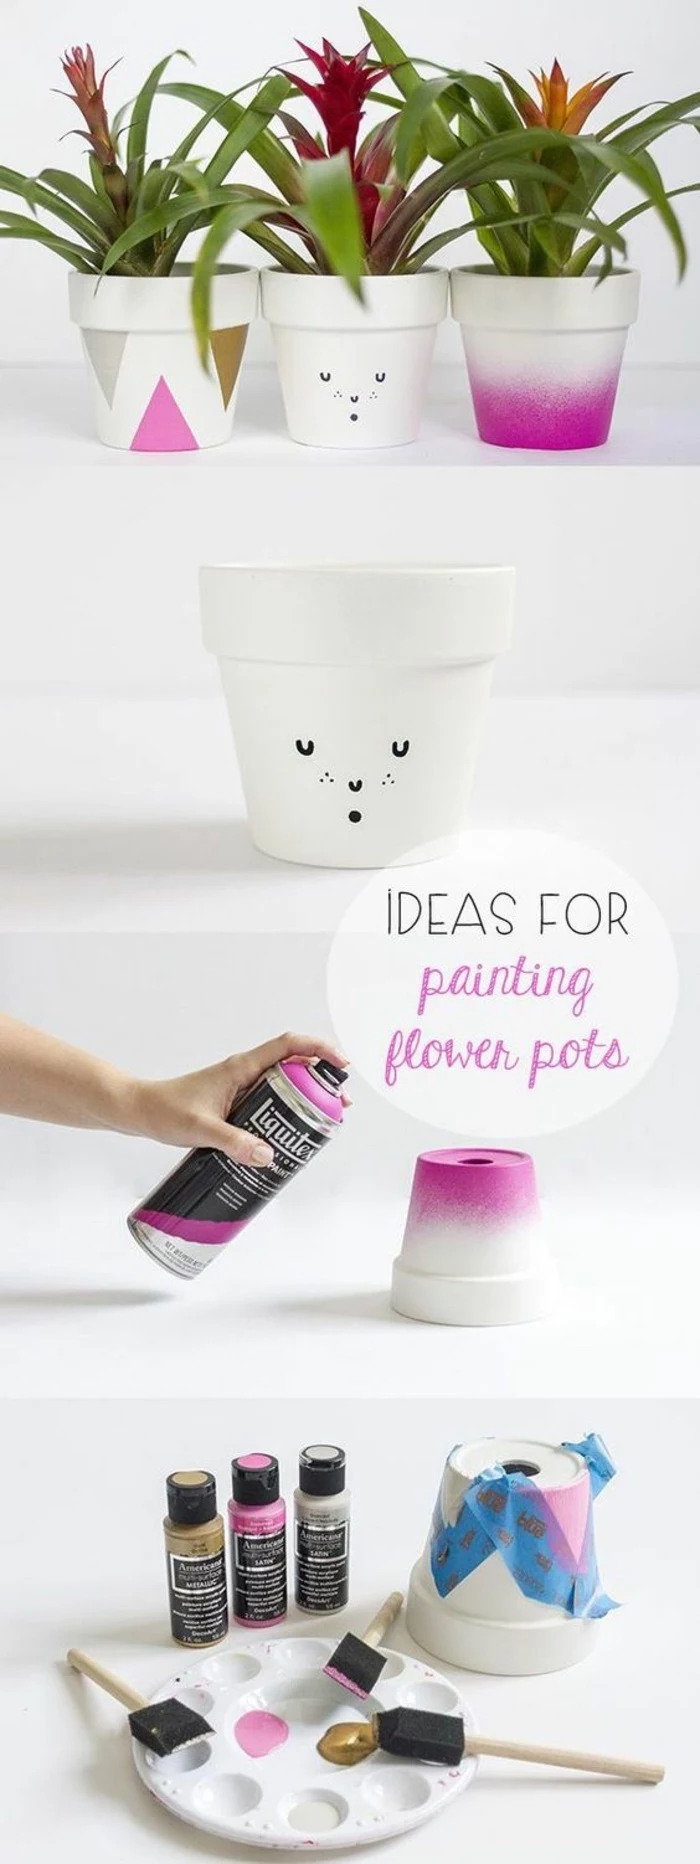 ideas for painting flower pots, ceramic pots, pink paint, fun crafts for teens